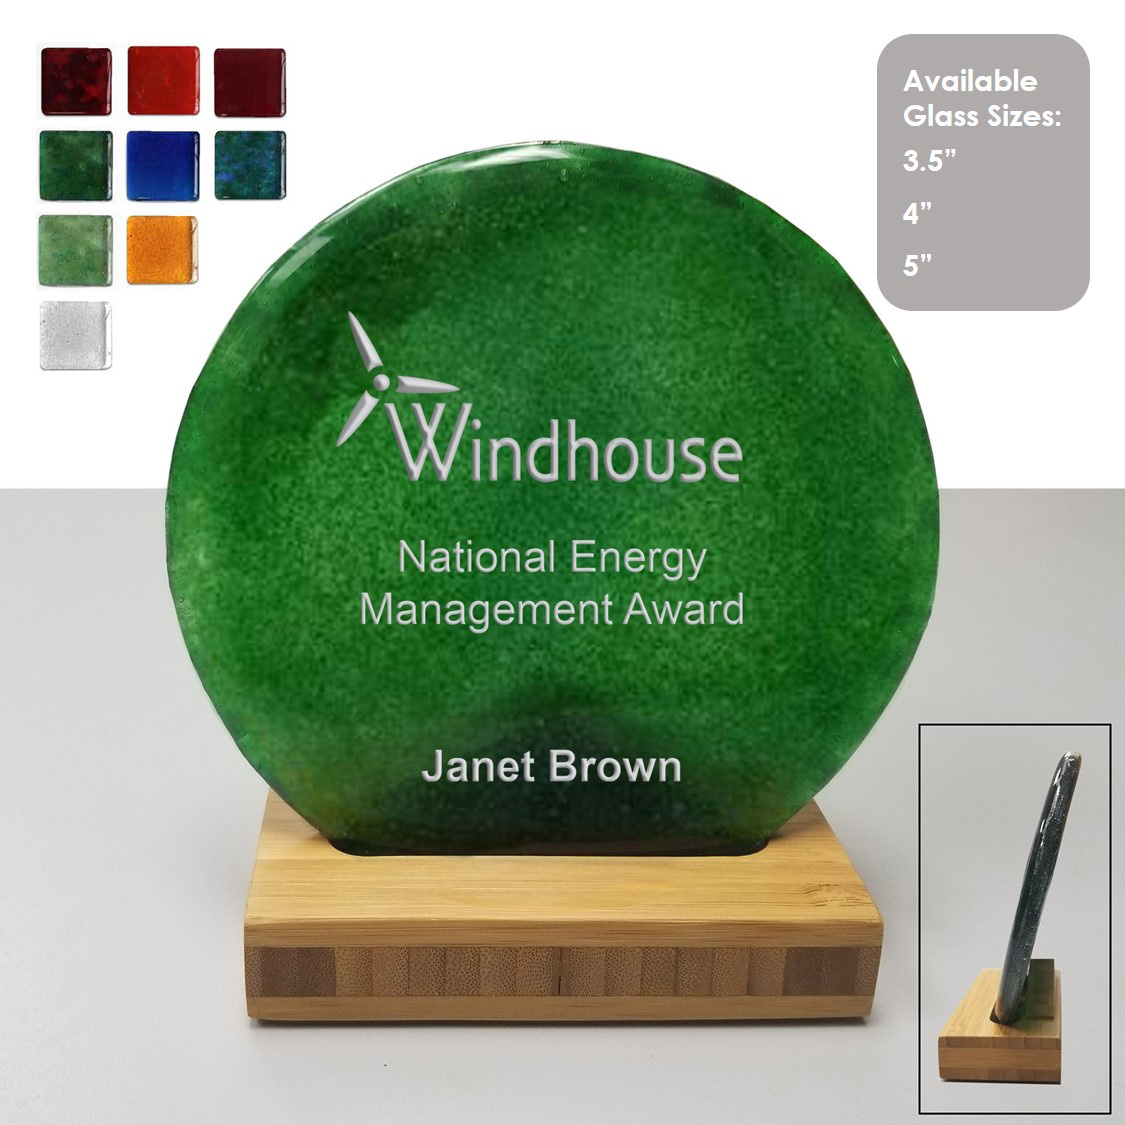 USA Made Round Recycled Glass Award on Bamboo Stand 6 inch tall